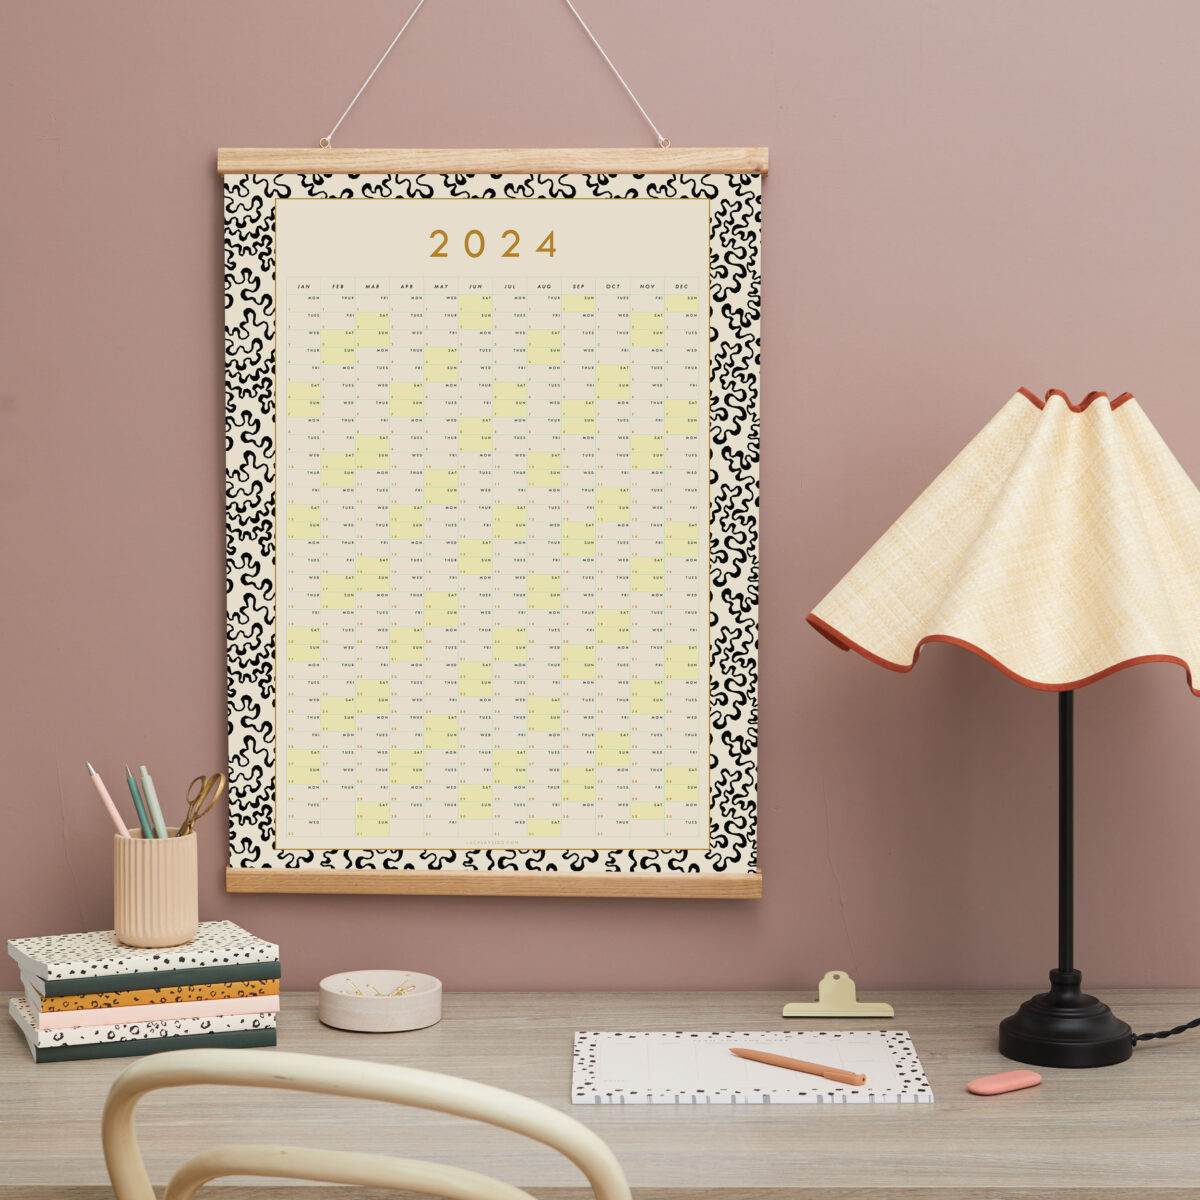 2024 year planner for the wall graphic black coral pattern with yellow highlighted dates